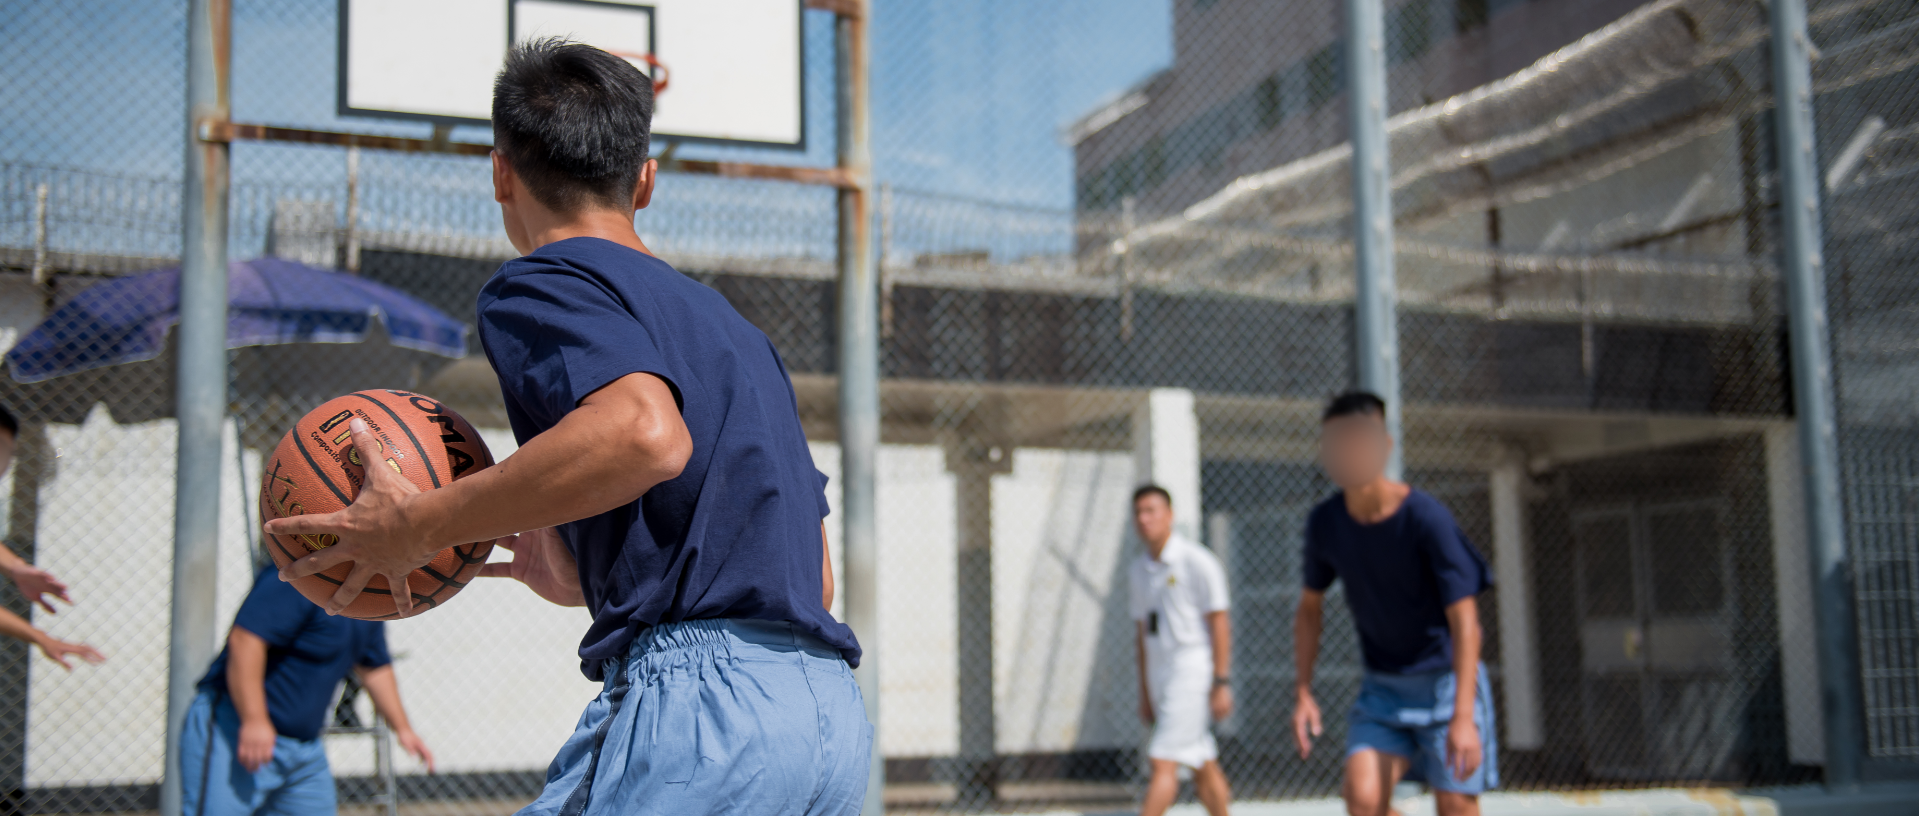 Persons in custody participate in recreational activities and physical exercises.